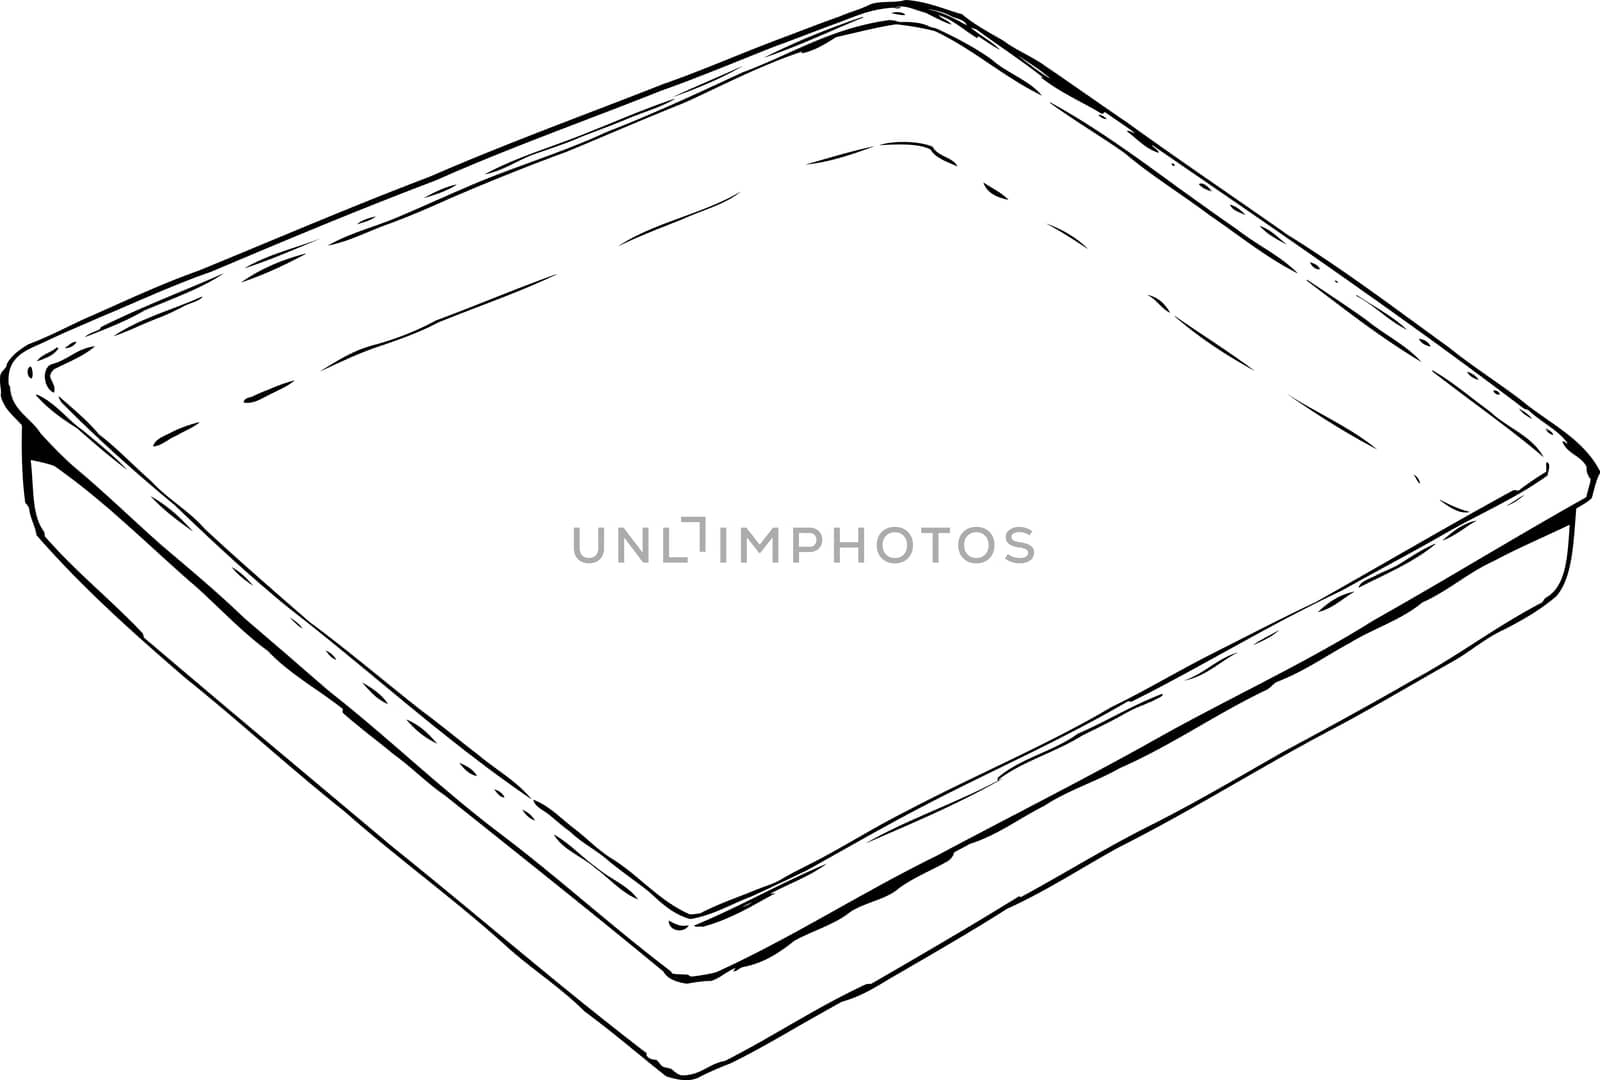 Outlined empty rectangular tray or pan sketch over white background